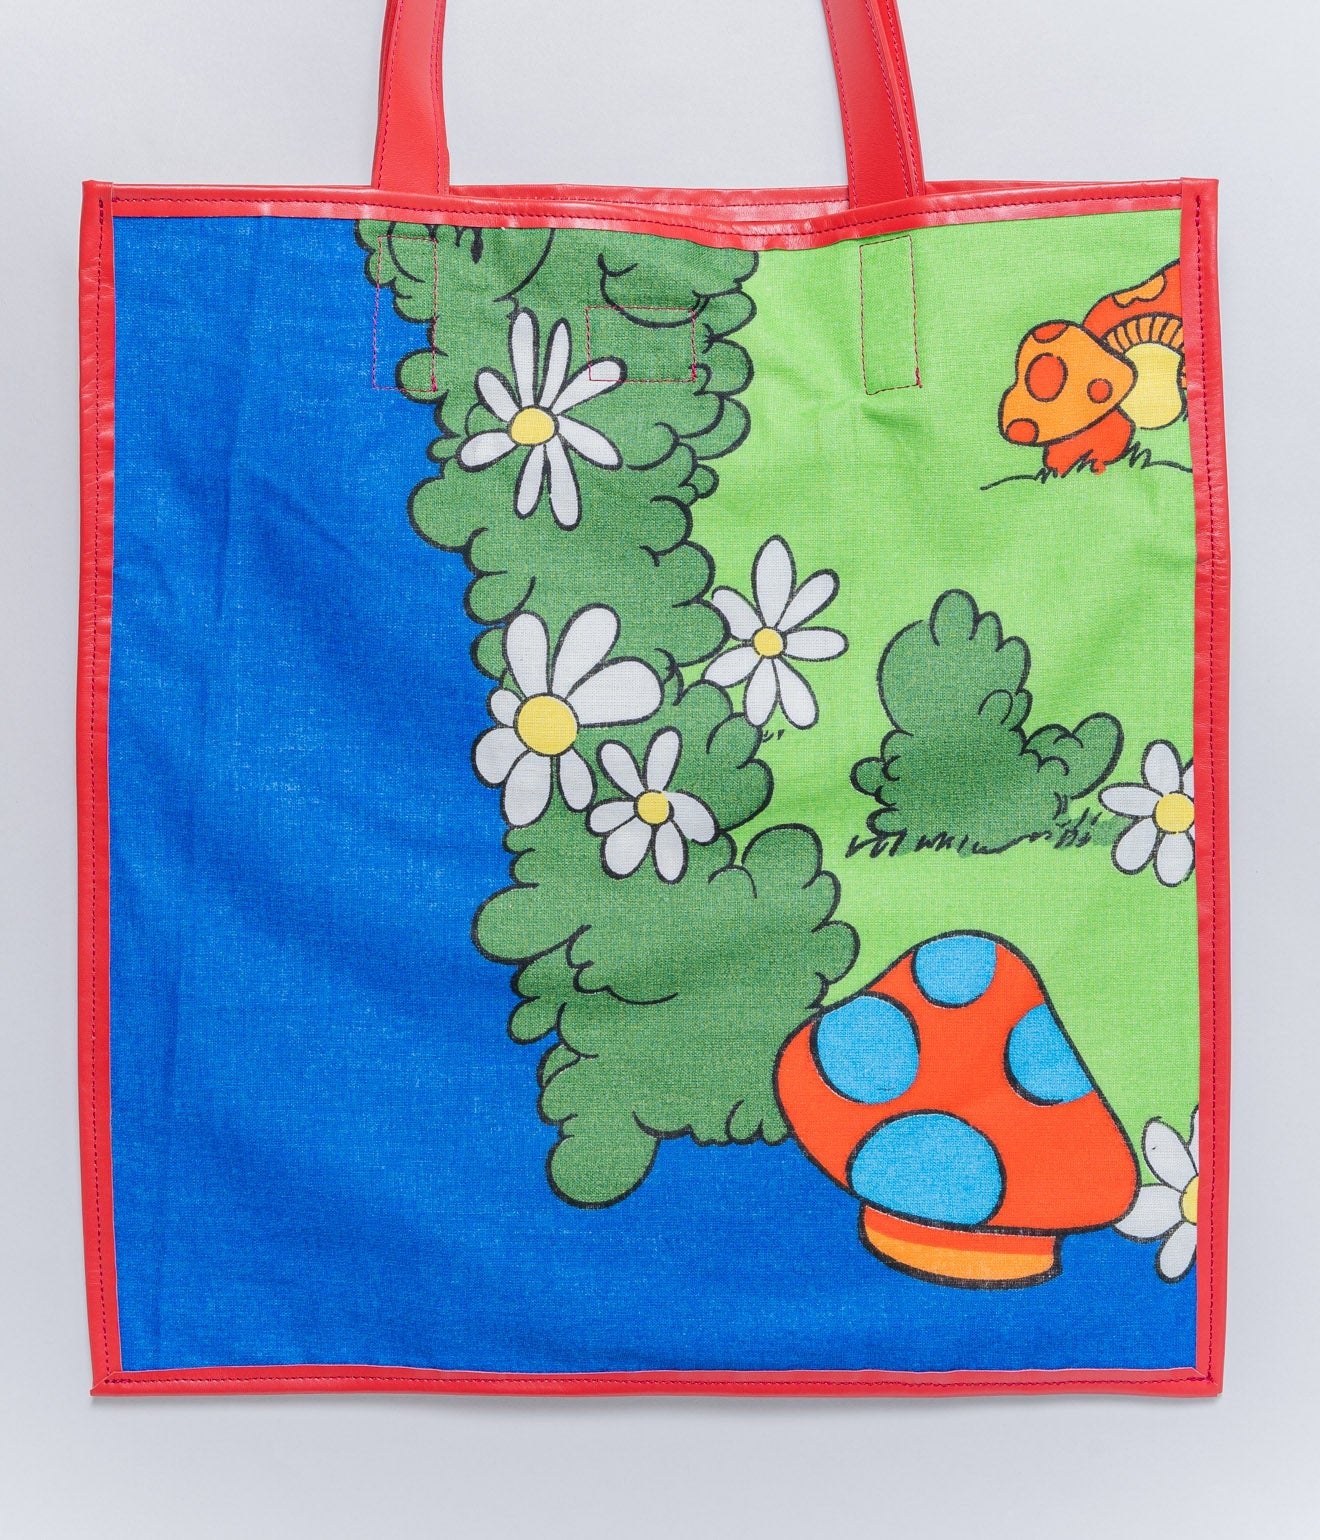 WEAREALLANIMALS UPCYCLE ”Piping Flat Tote -Vintage Smurf Fabric-" #5 - WEAREALLANIMALS